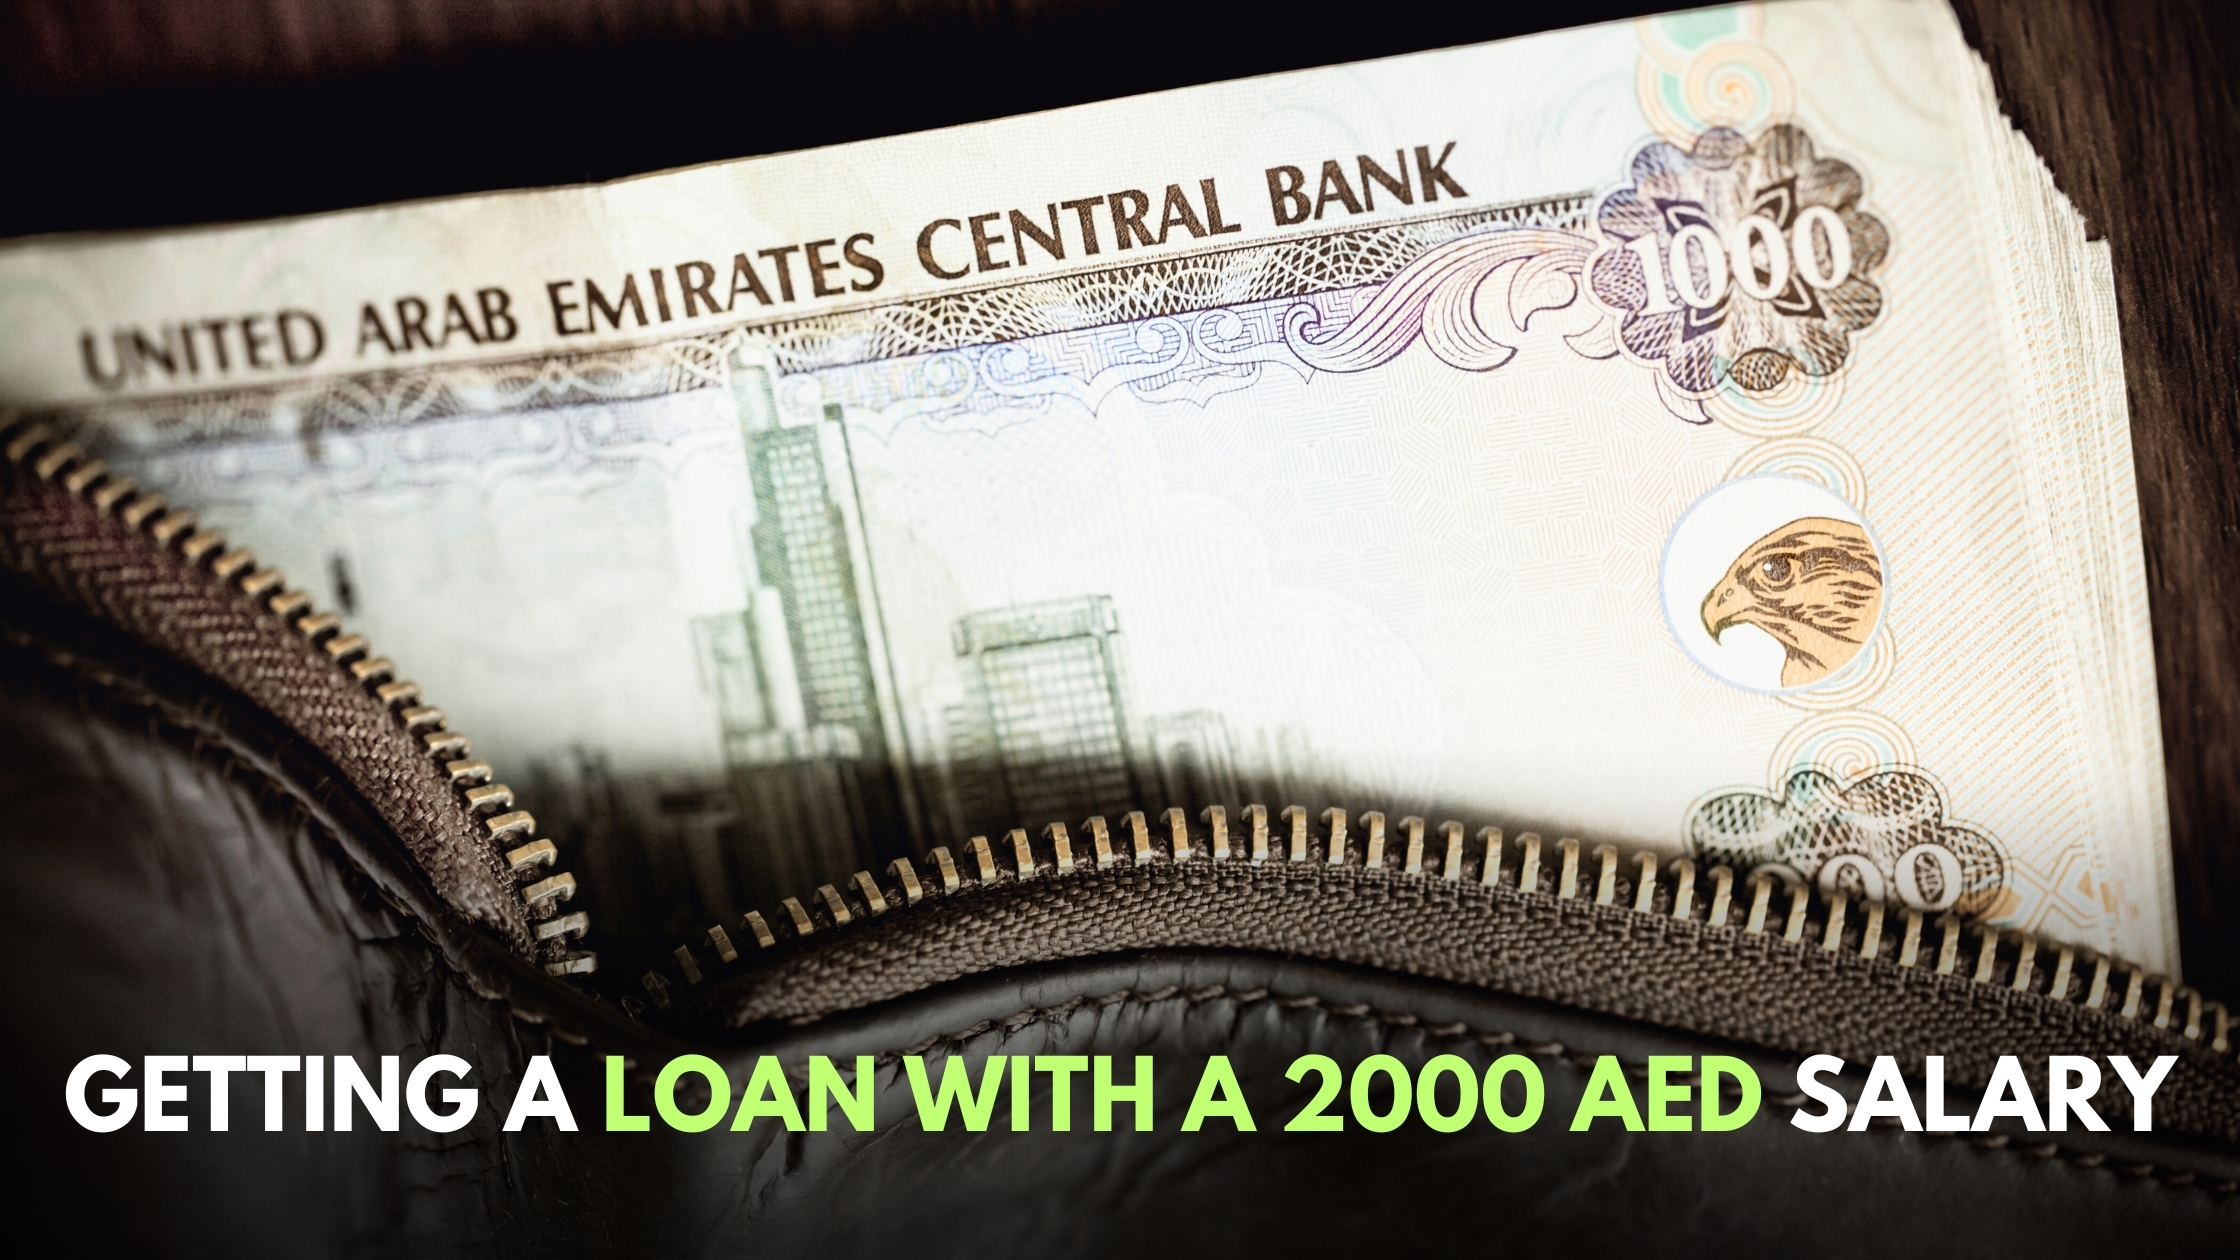 Loan With a 2000 AED Salary